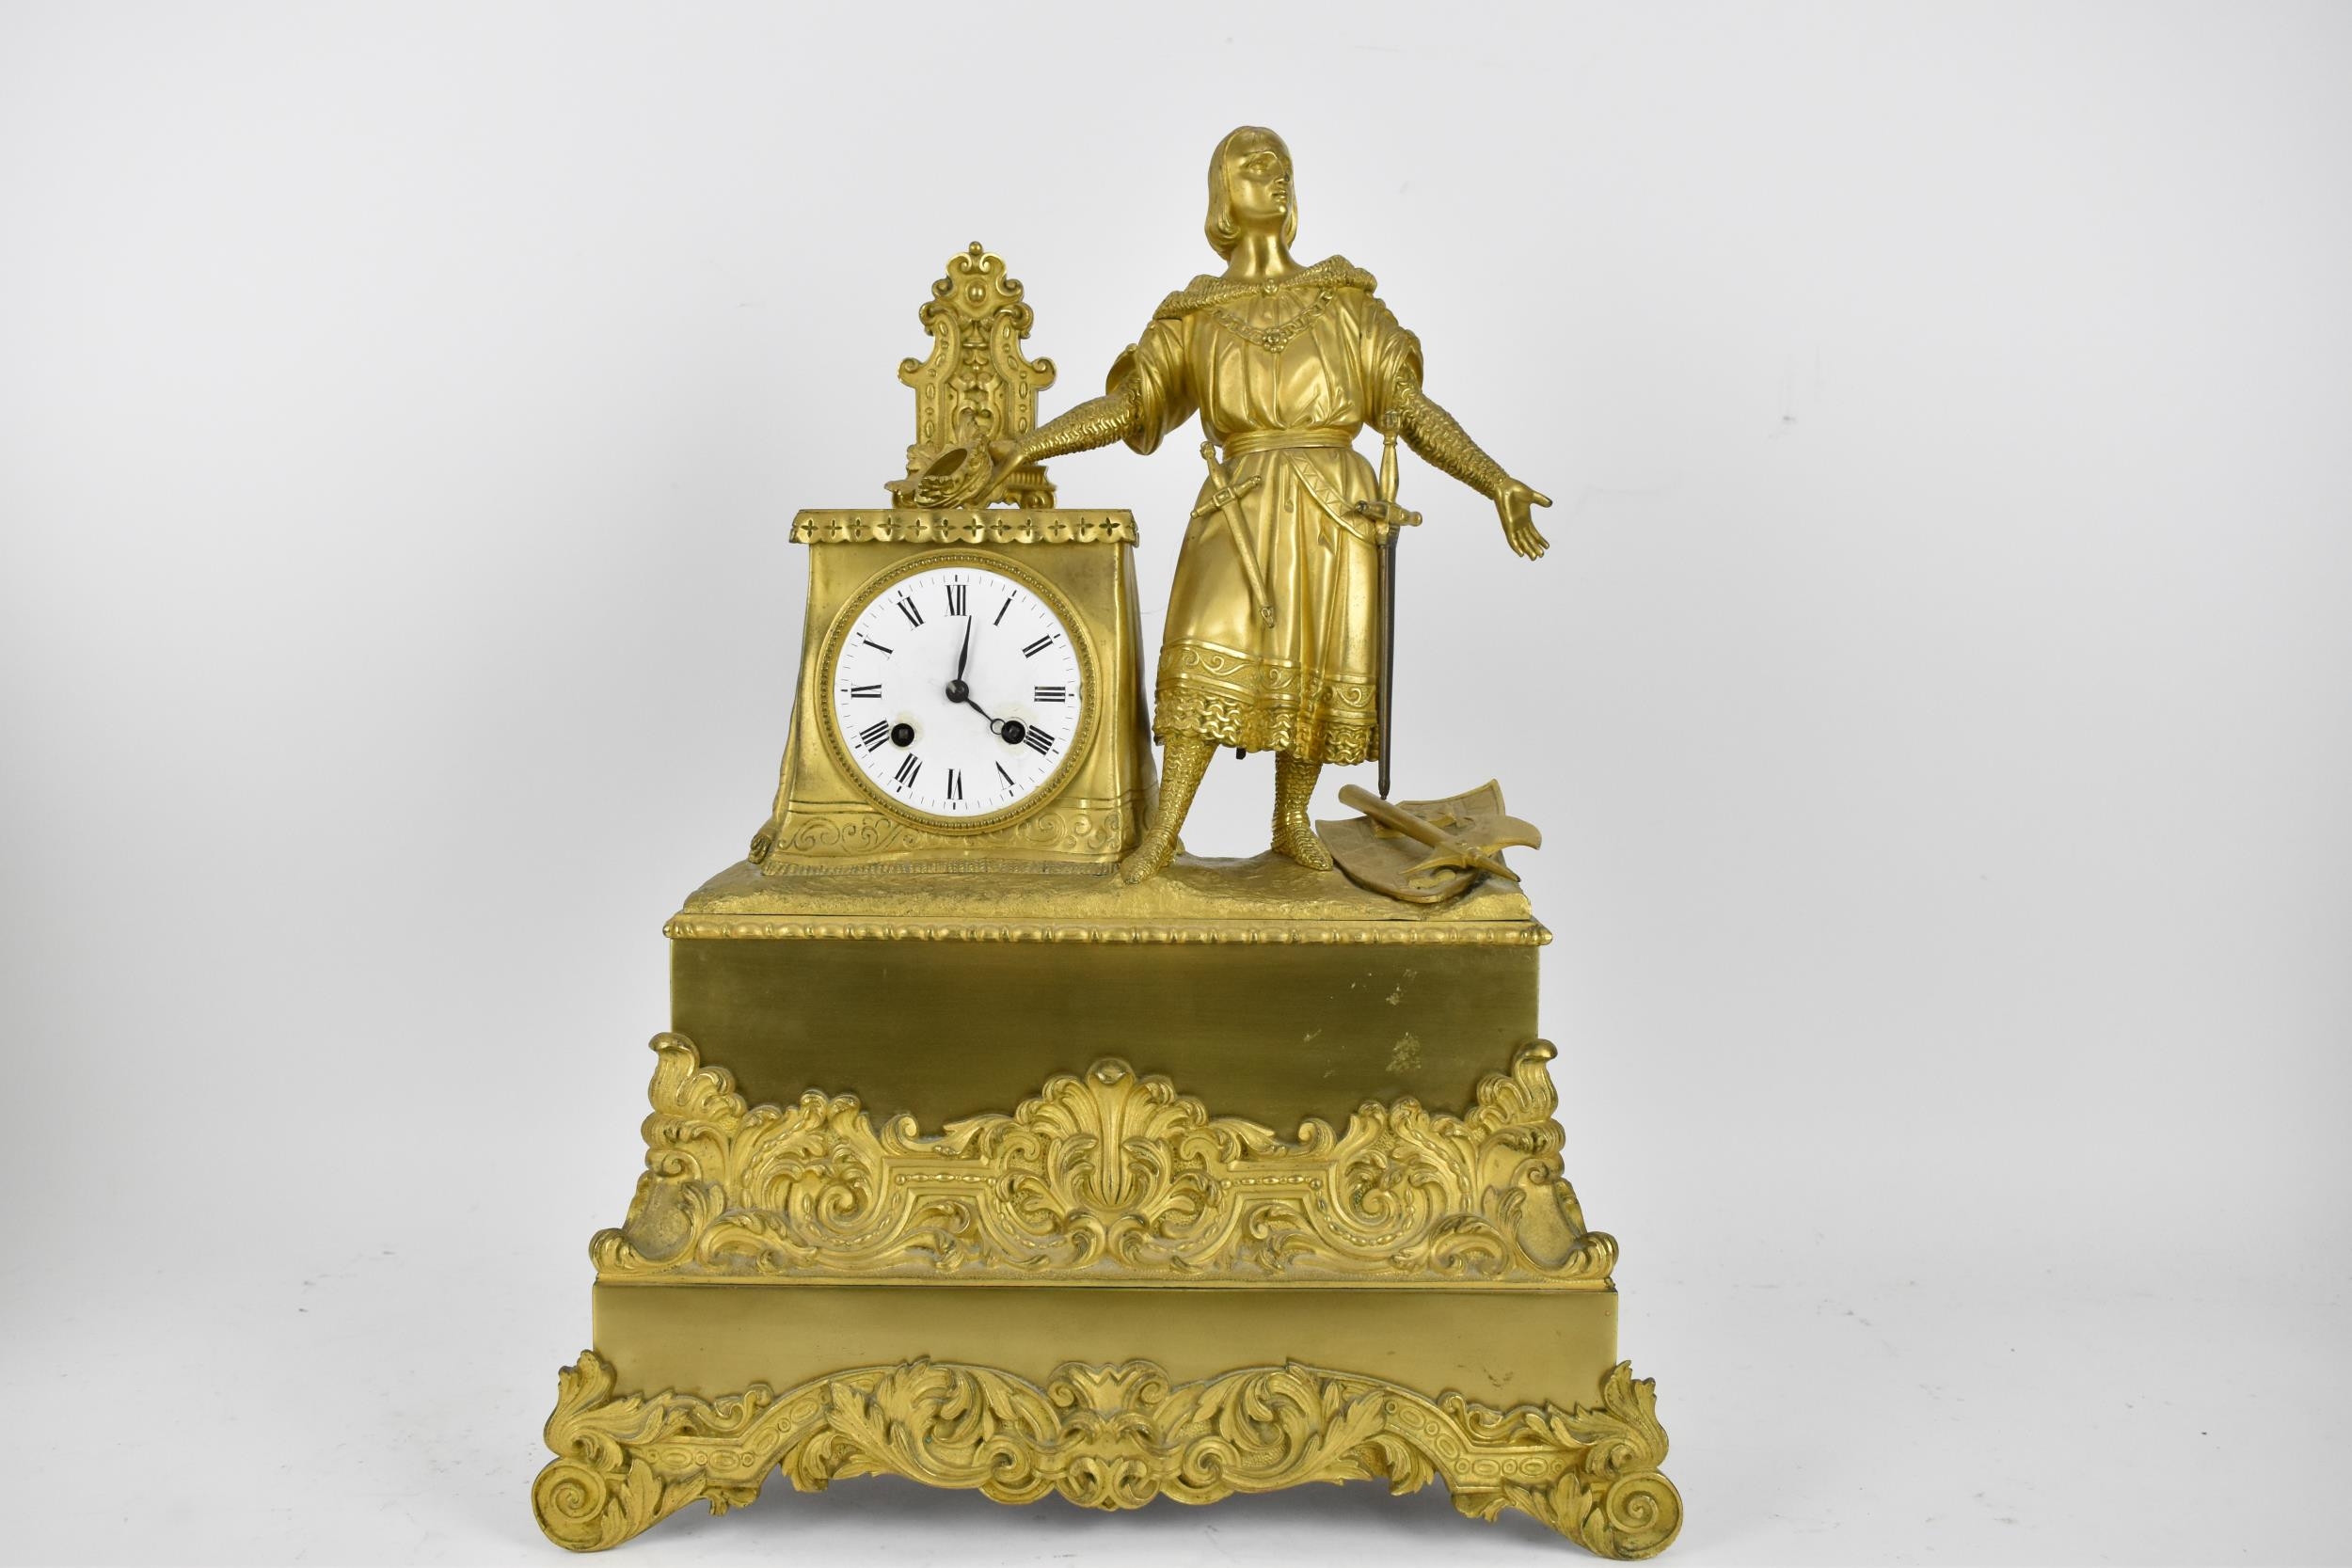 A 19th century French brass cased 8 day mantle clock, the case decorated with a figure, possibly